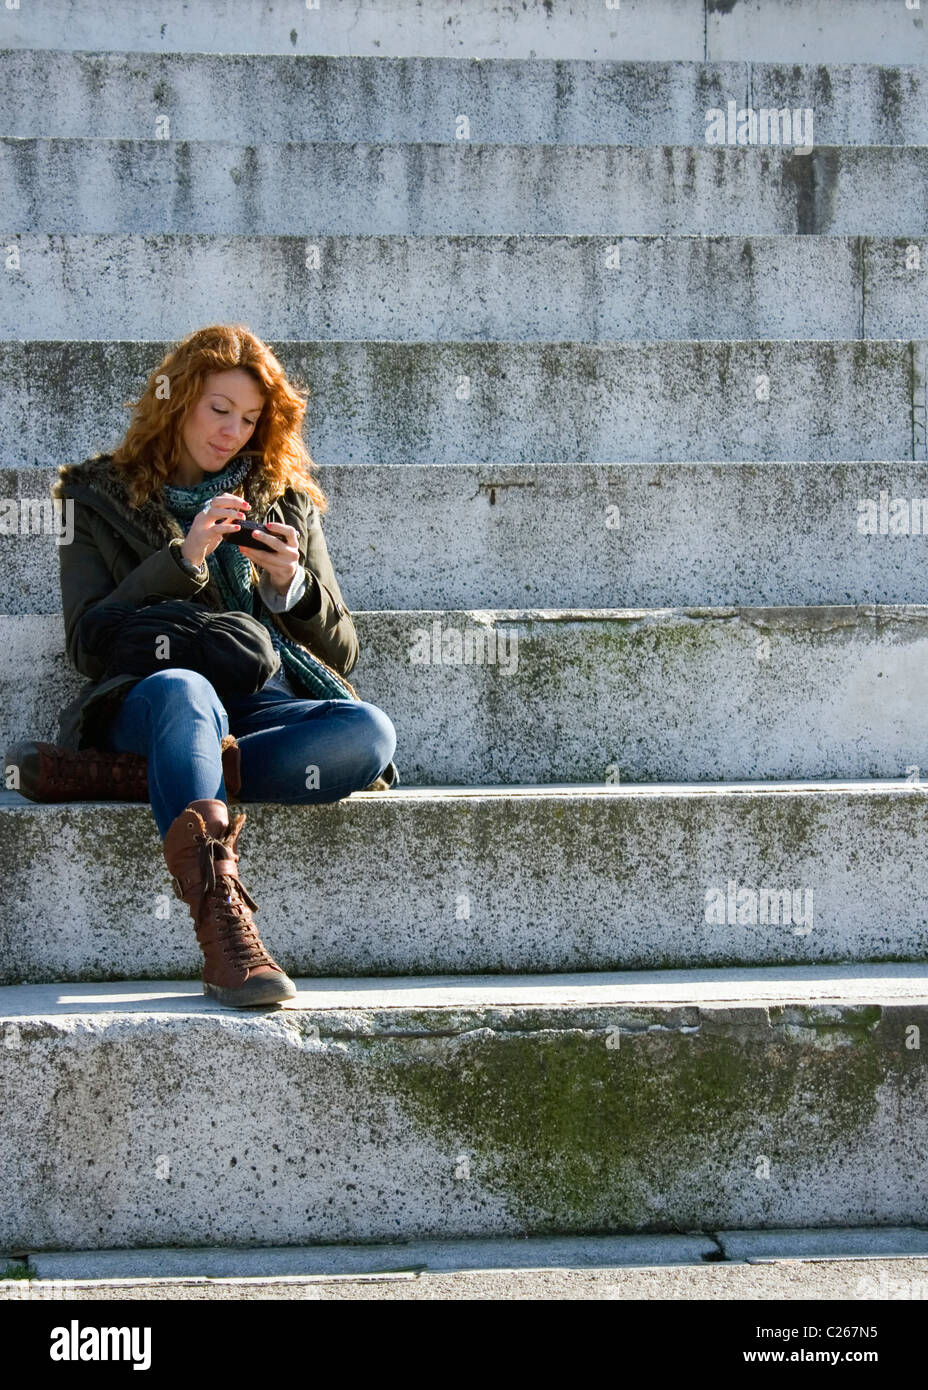 Young woman sat on concrete steps using a mobile telephone. Stock Photo